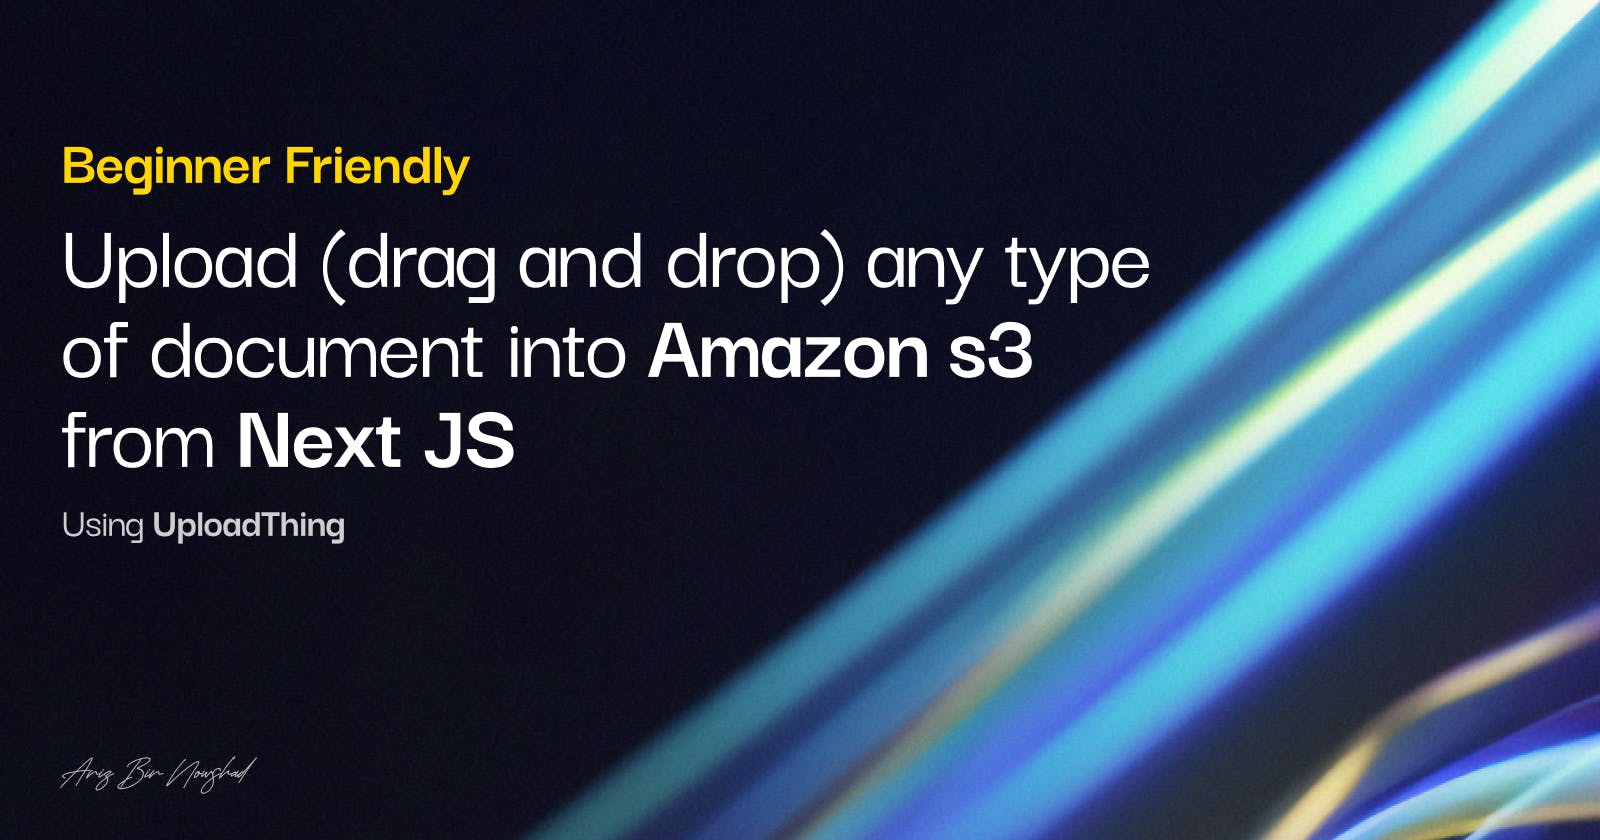 Upload any documents to amazon s3 hassle free and for free in Next JS (App router) with drag and drop feature.